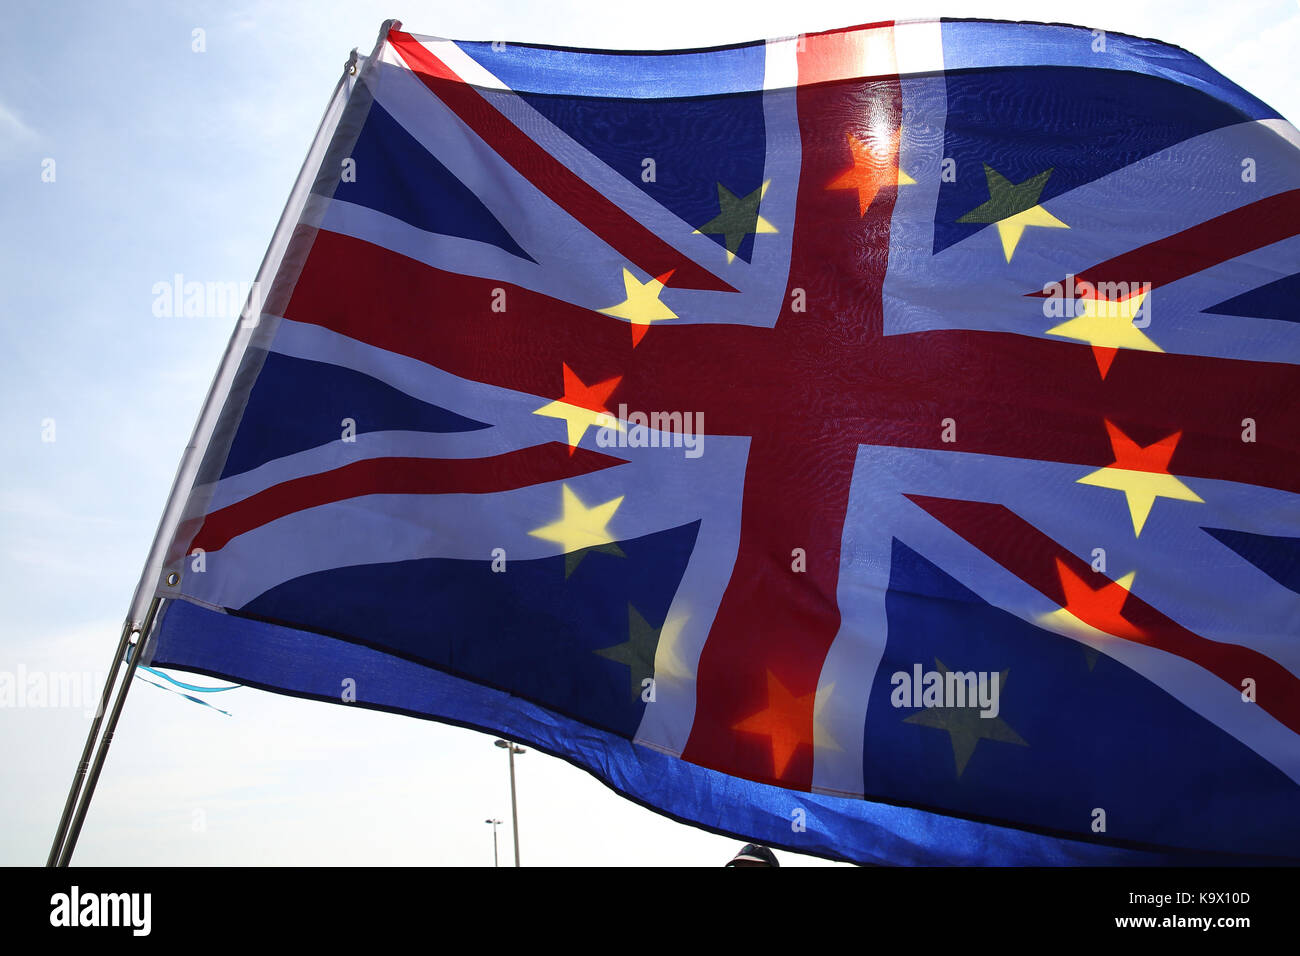 Brighton, UK. 24th September, 2017. Light shines through the European Union and Union Jack flags during a pro European Union protest against Brexit in Brighton, UK, Sunday, September 24, 2017. Protesters rallied outside the annual Labour Party Conference being held in Brighton and attended by the opposition leader Jeremy Corbyn. Photograph : Credit: Luke MacGregor/Alamy Live News Stock Photo